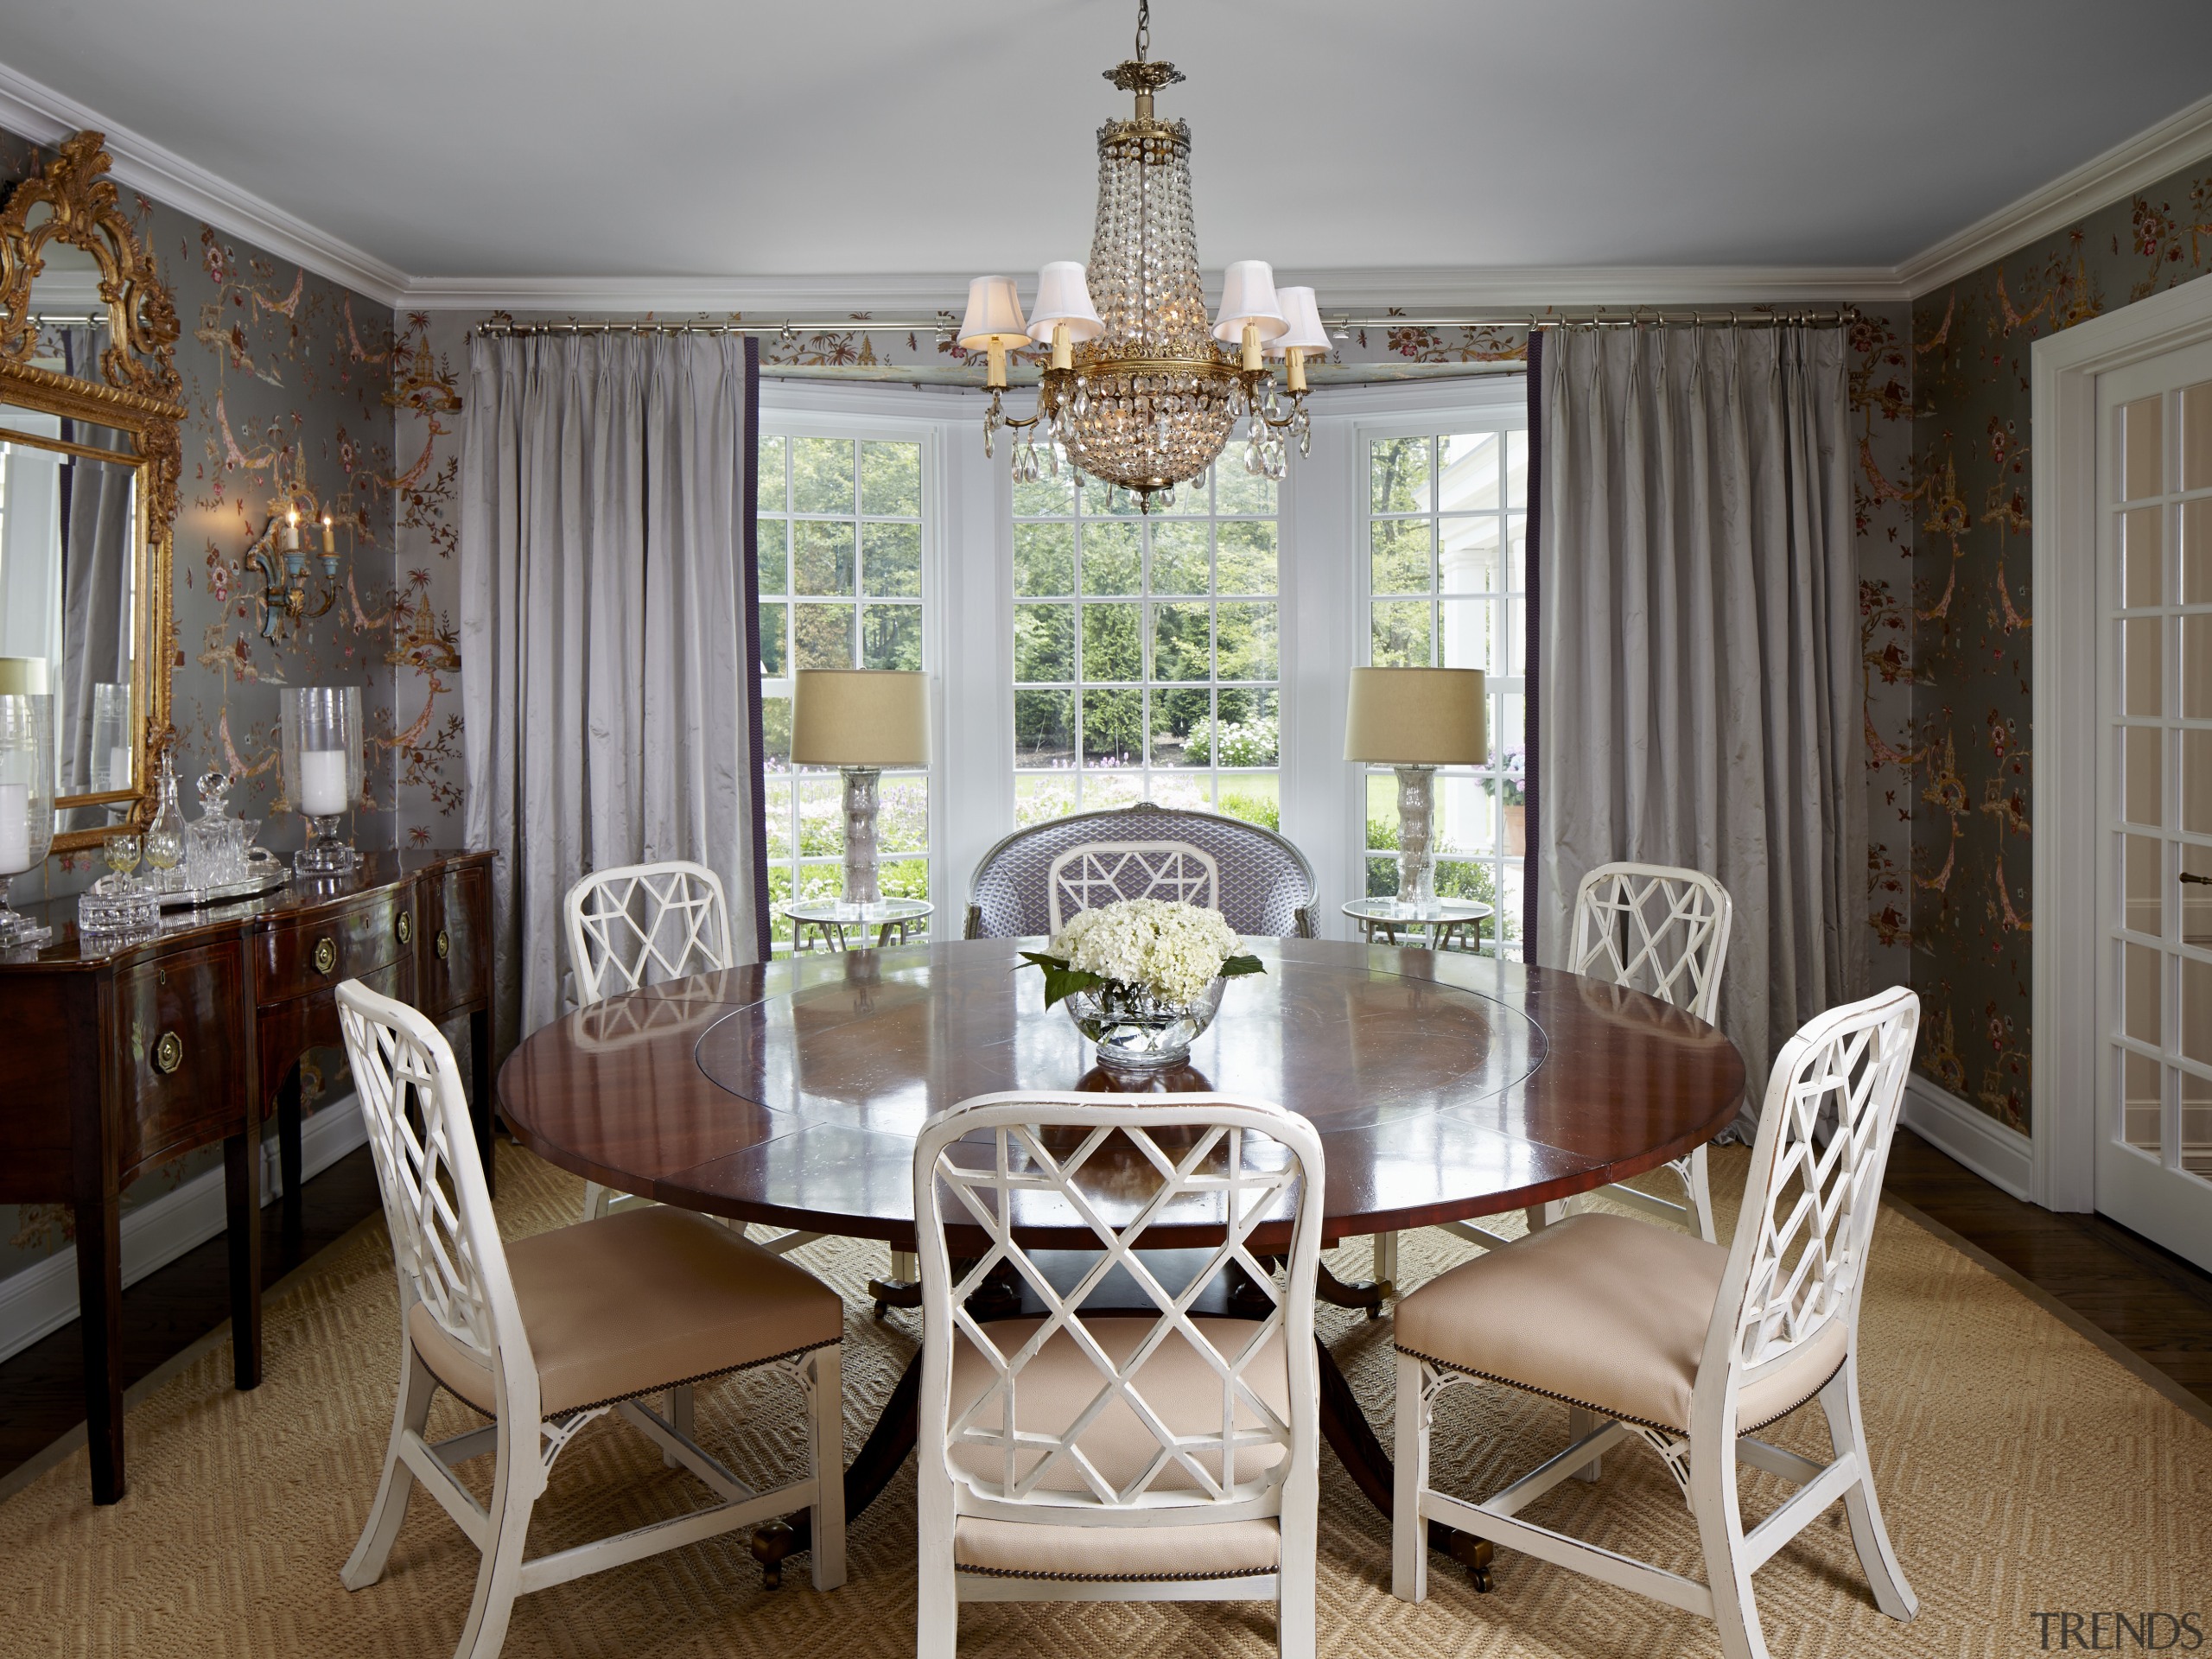 On this remodel project by Burns &amp; Beyerl chair, dining room, estate, furniture, home, interior design, living room, real estate, room, table, window, window treatment, gray